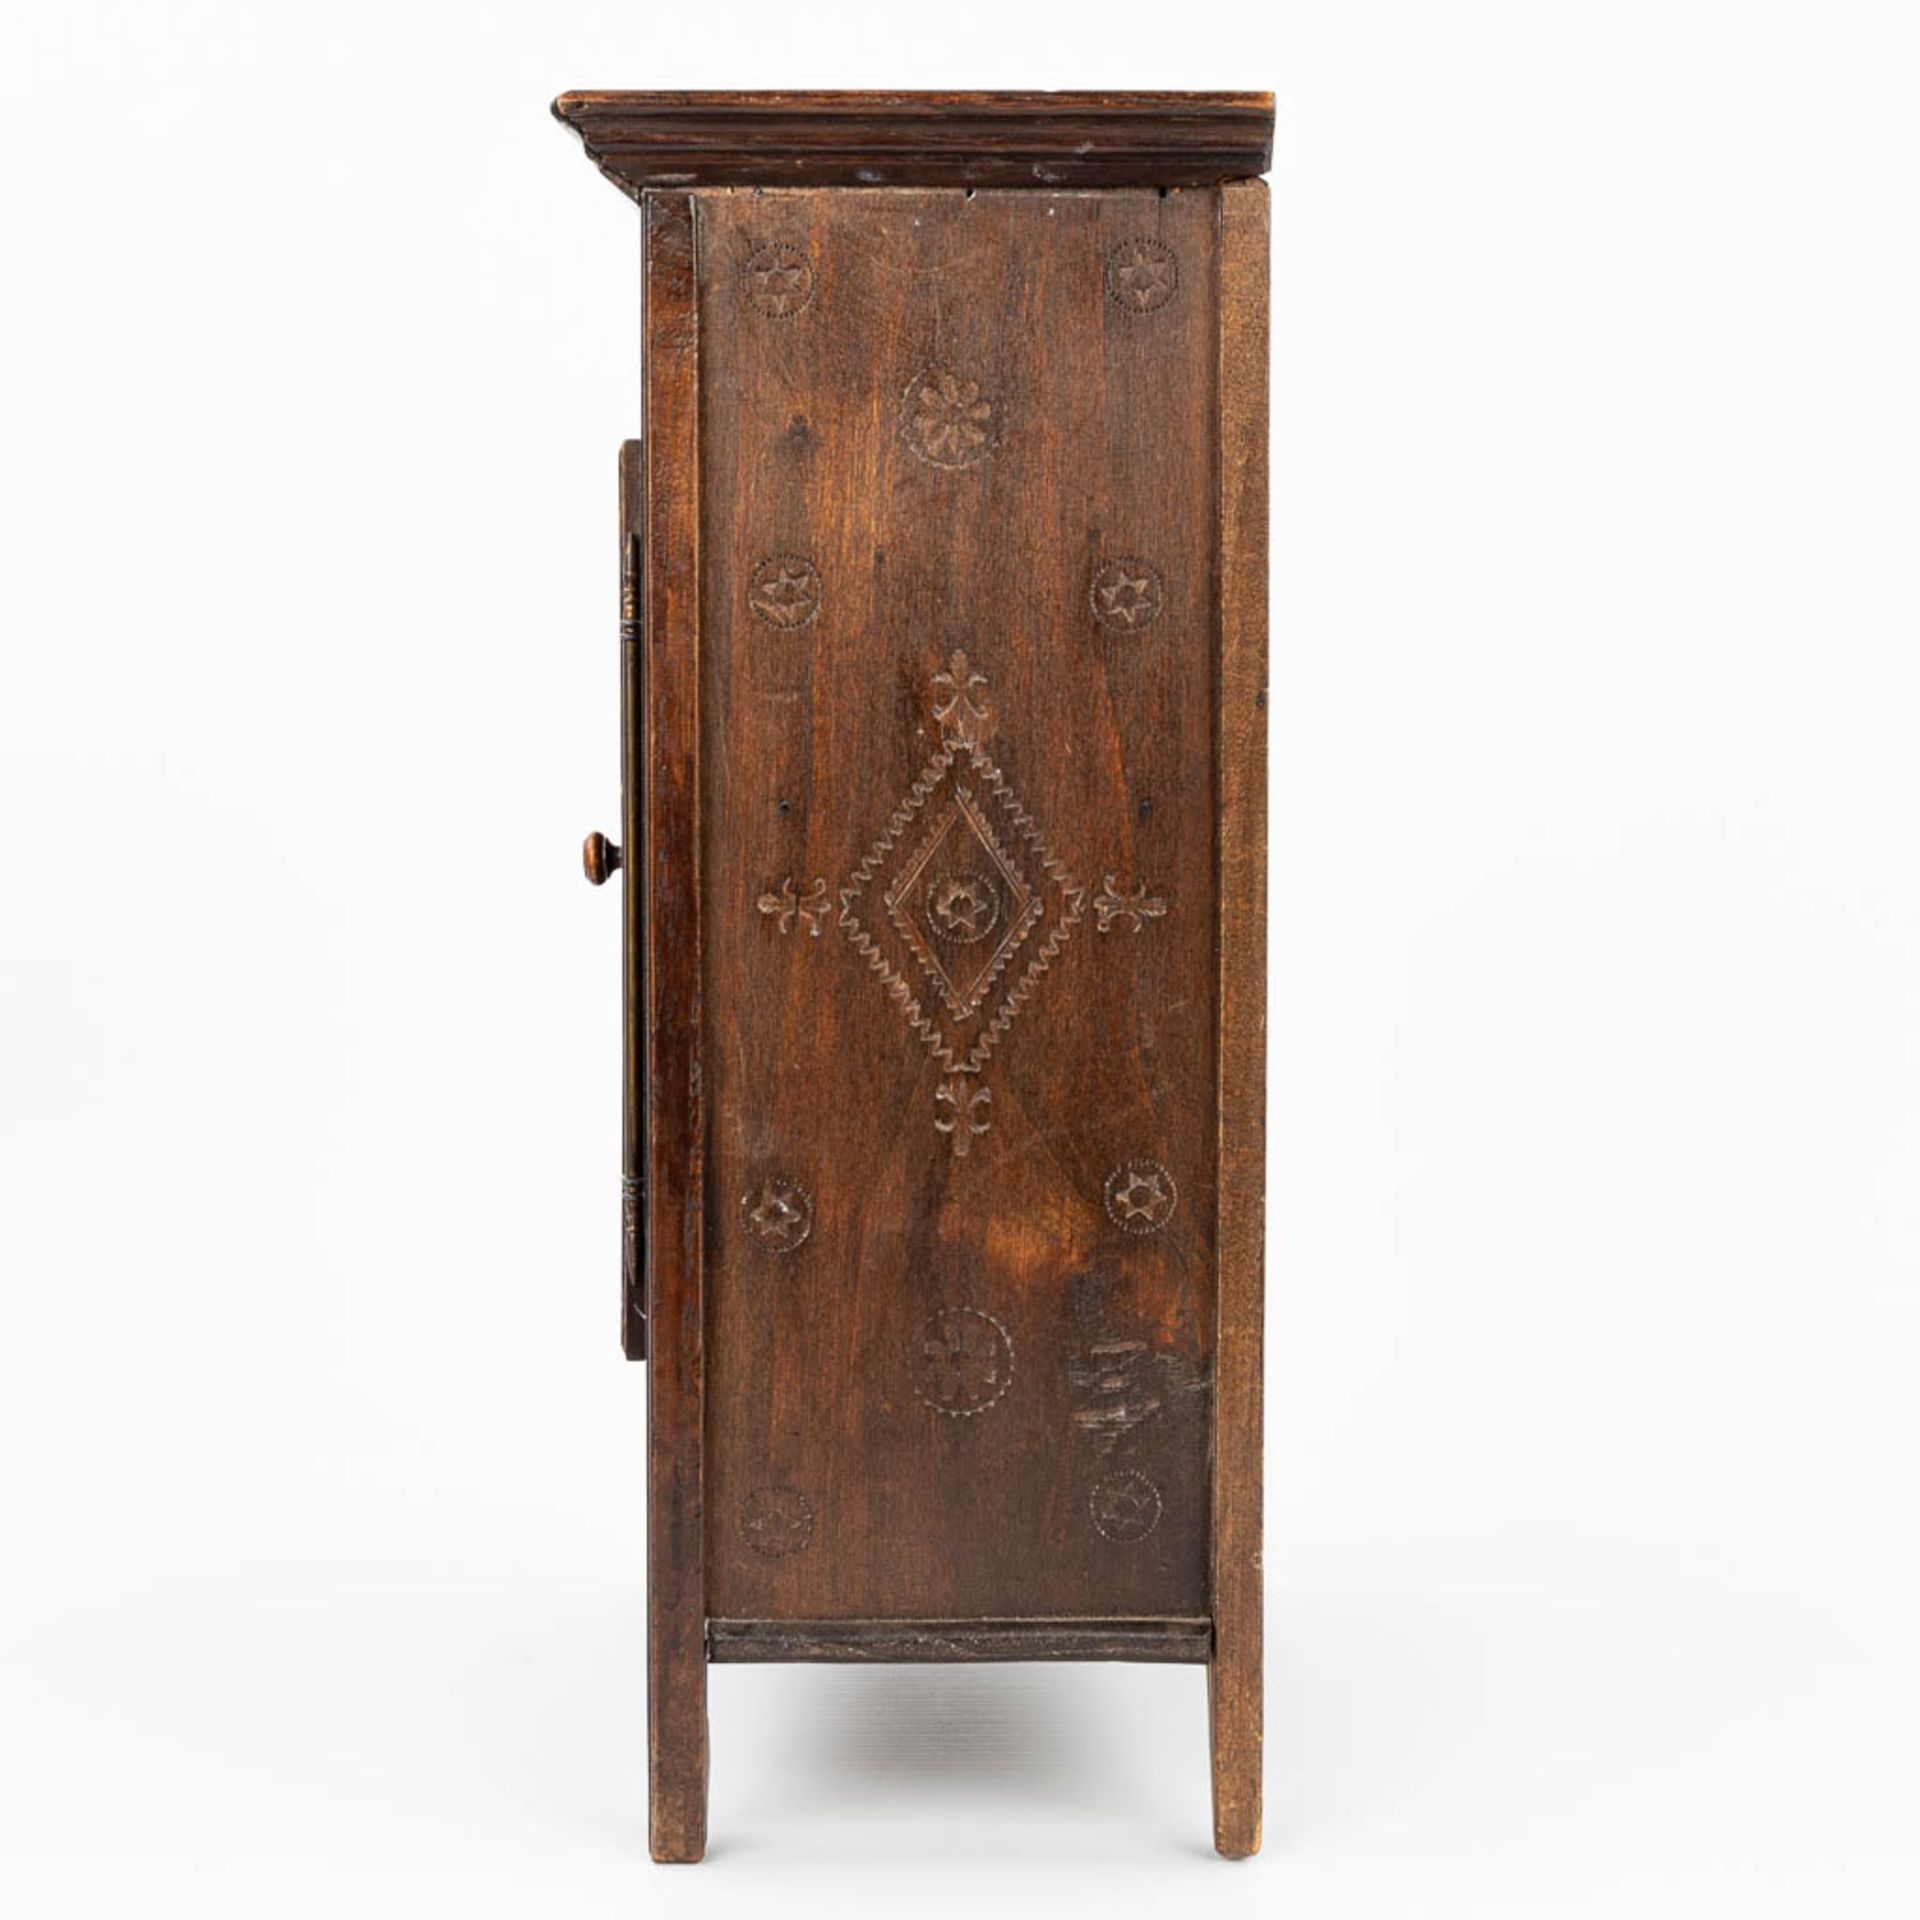 A miniature Breton cabinet, made of sculptured wood. (H:37cm) - Image 4 of 14